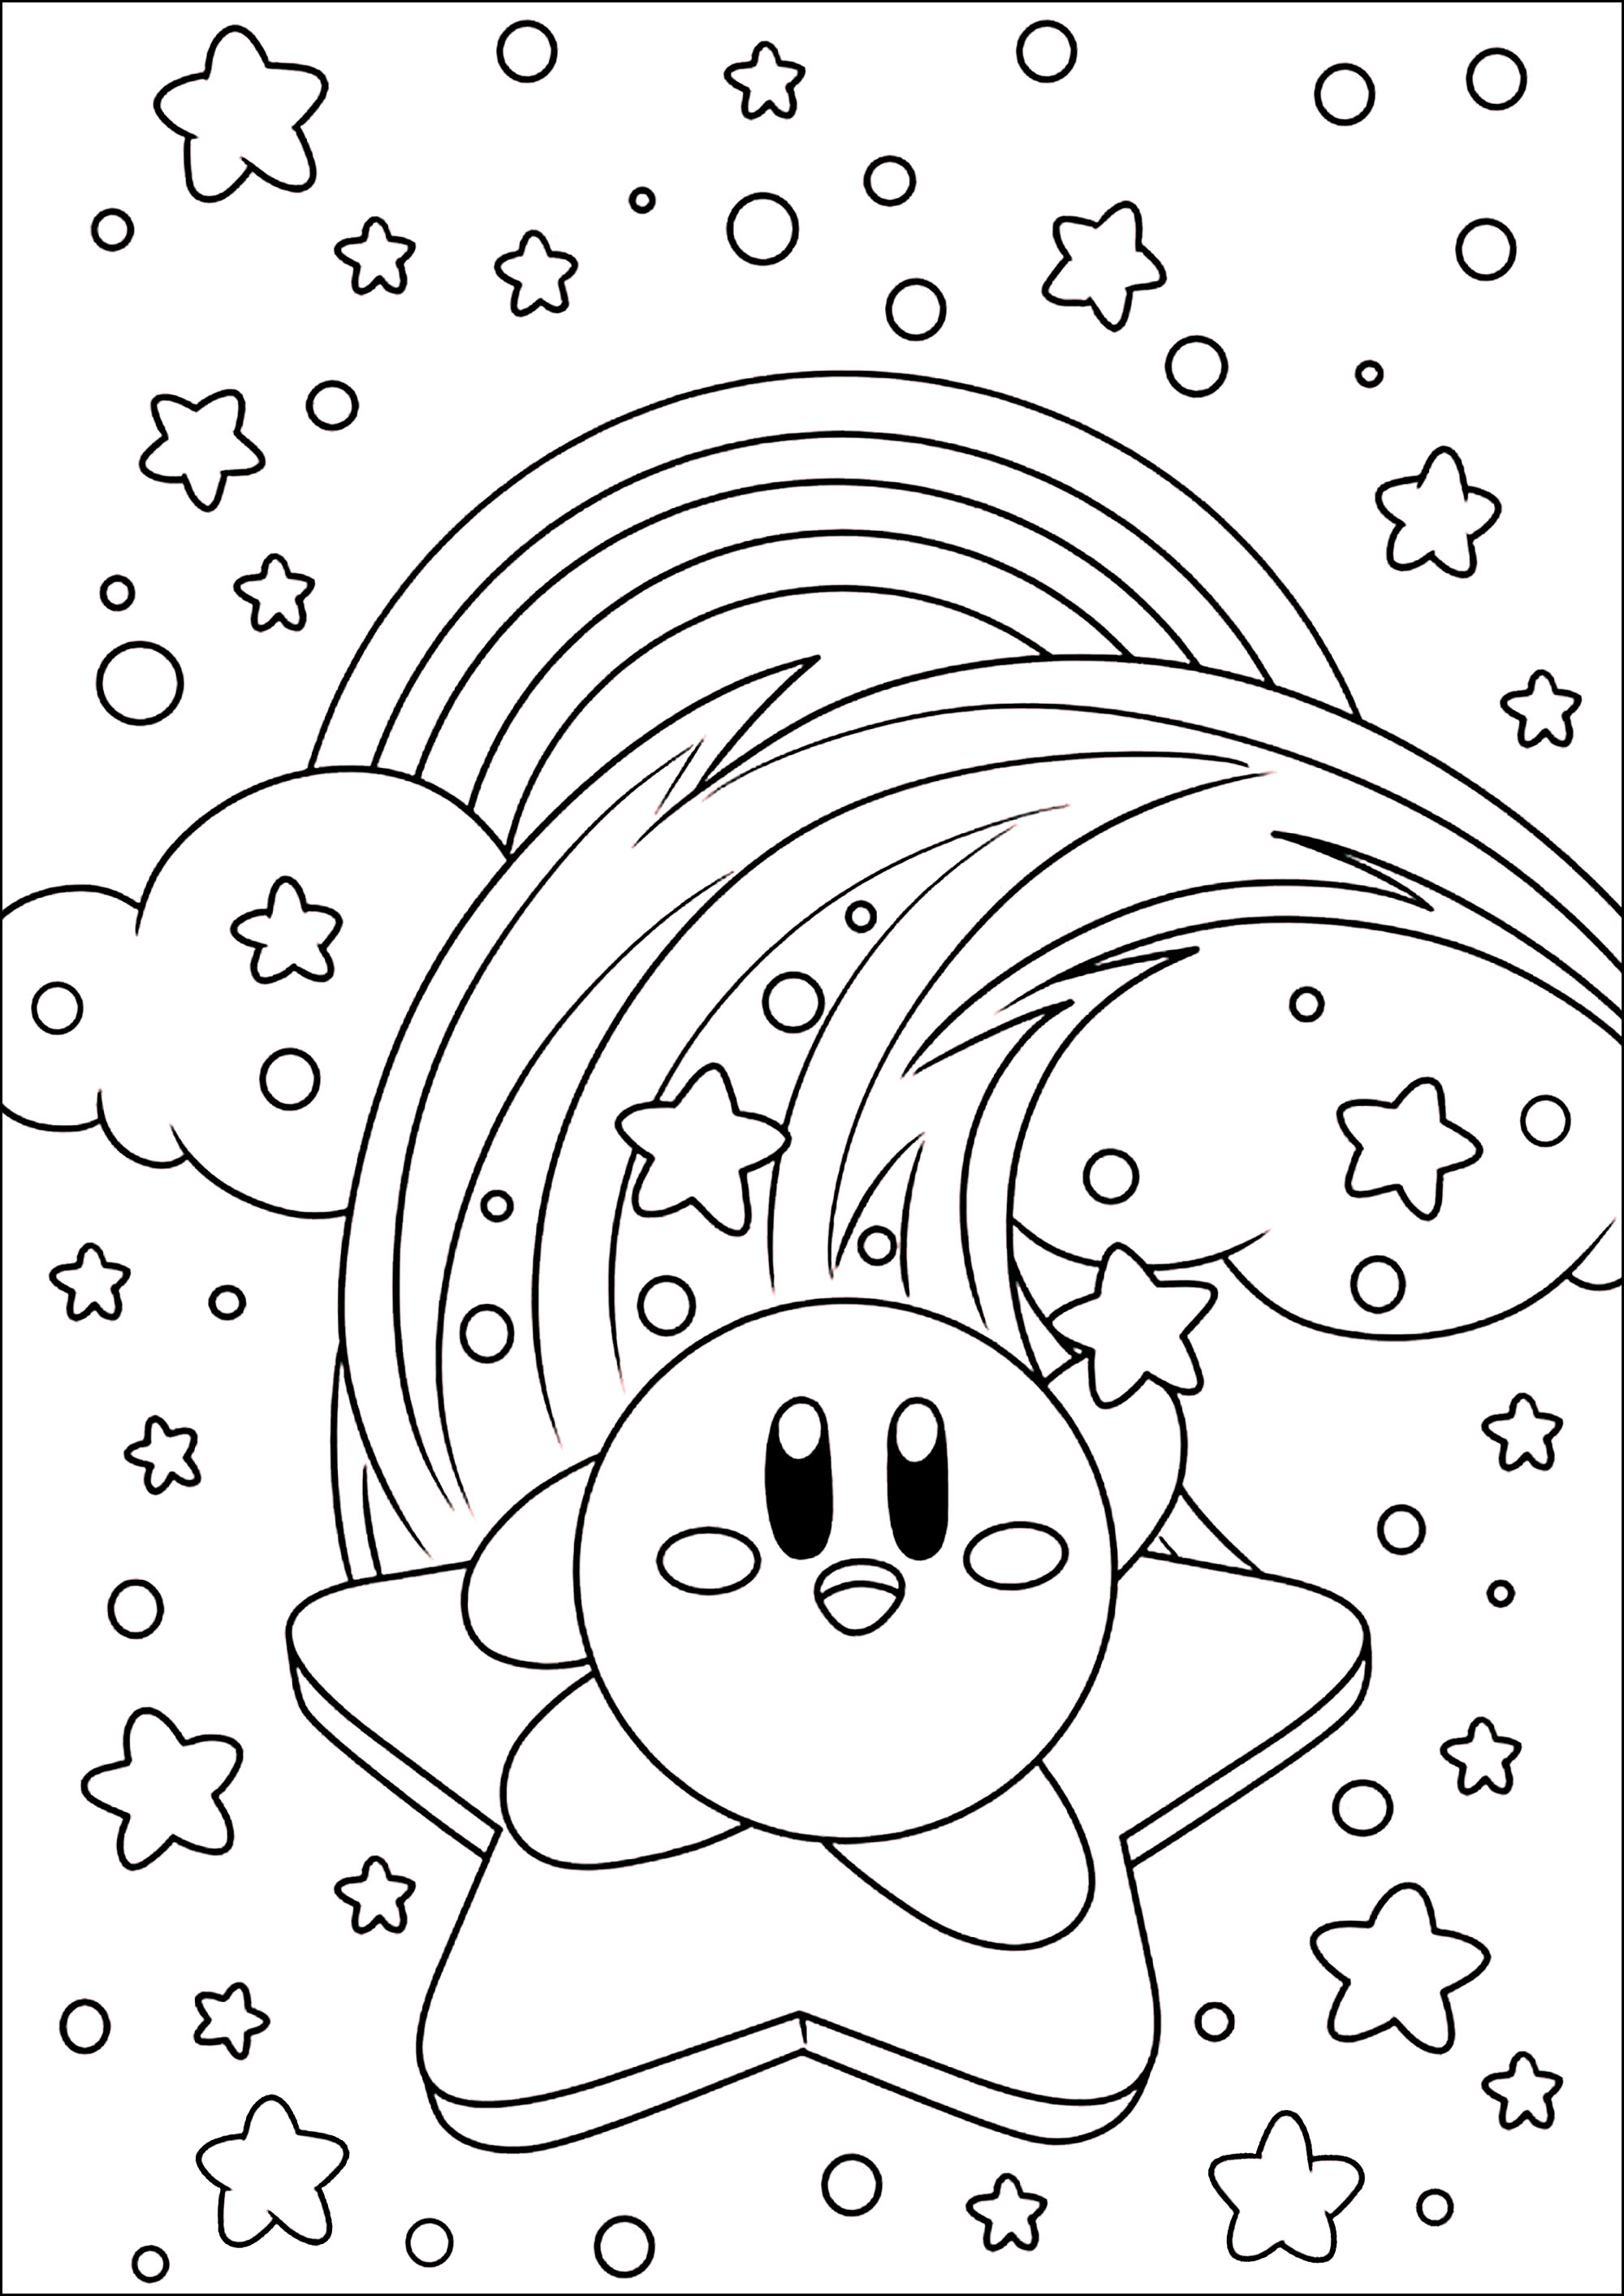 Kirby on a star in the sky with clouds and rainbow. Kirby (カービィ, Kābī, pronounced in Japanese: [kaːbiː]) is a video game character, created by Masahiro Sakurai for the Nintendo company. It's a little pink ball from the planet Popstar that sucks in its enemies to 'copy' their powers.